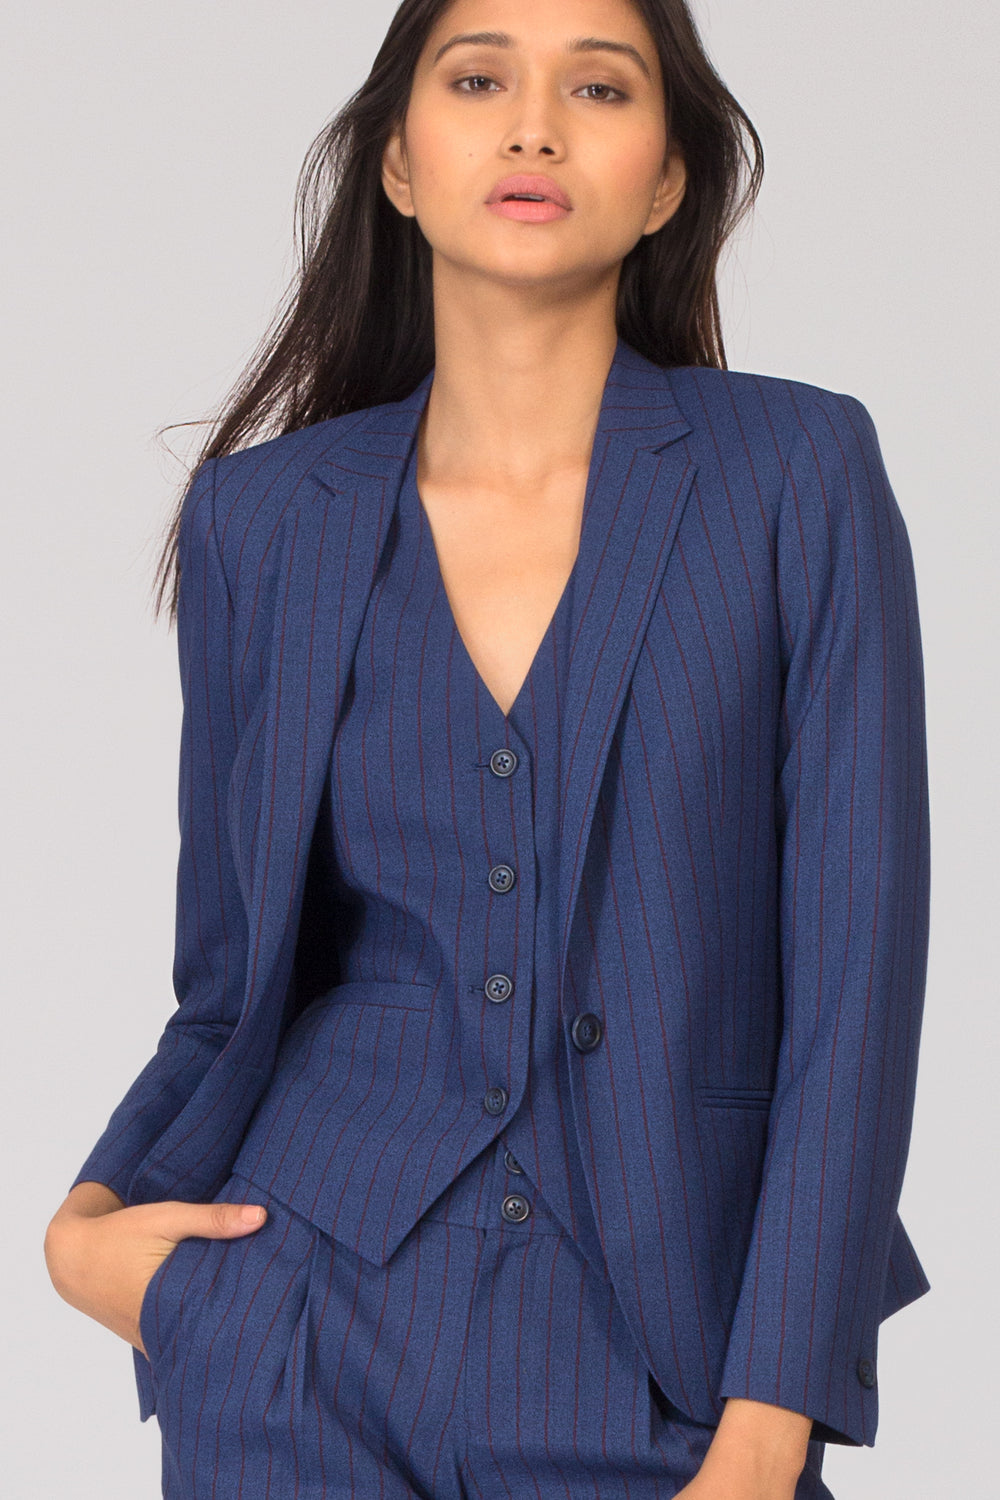 Blue Pinstripe Formal Blazer Pant Suits for Working Women. Shop for formal trousers, suits and workwear dresses at www.intermod.in